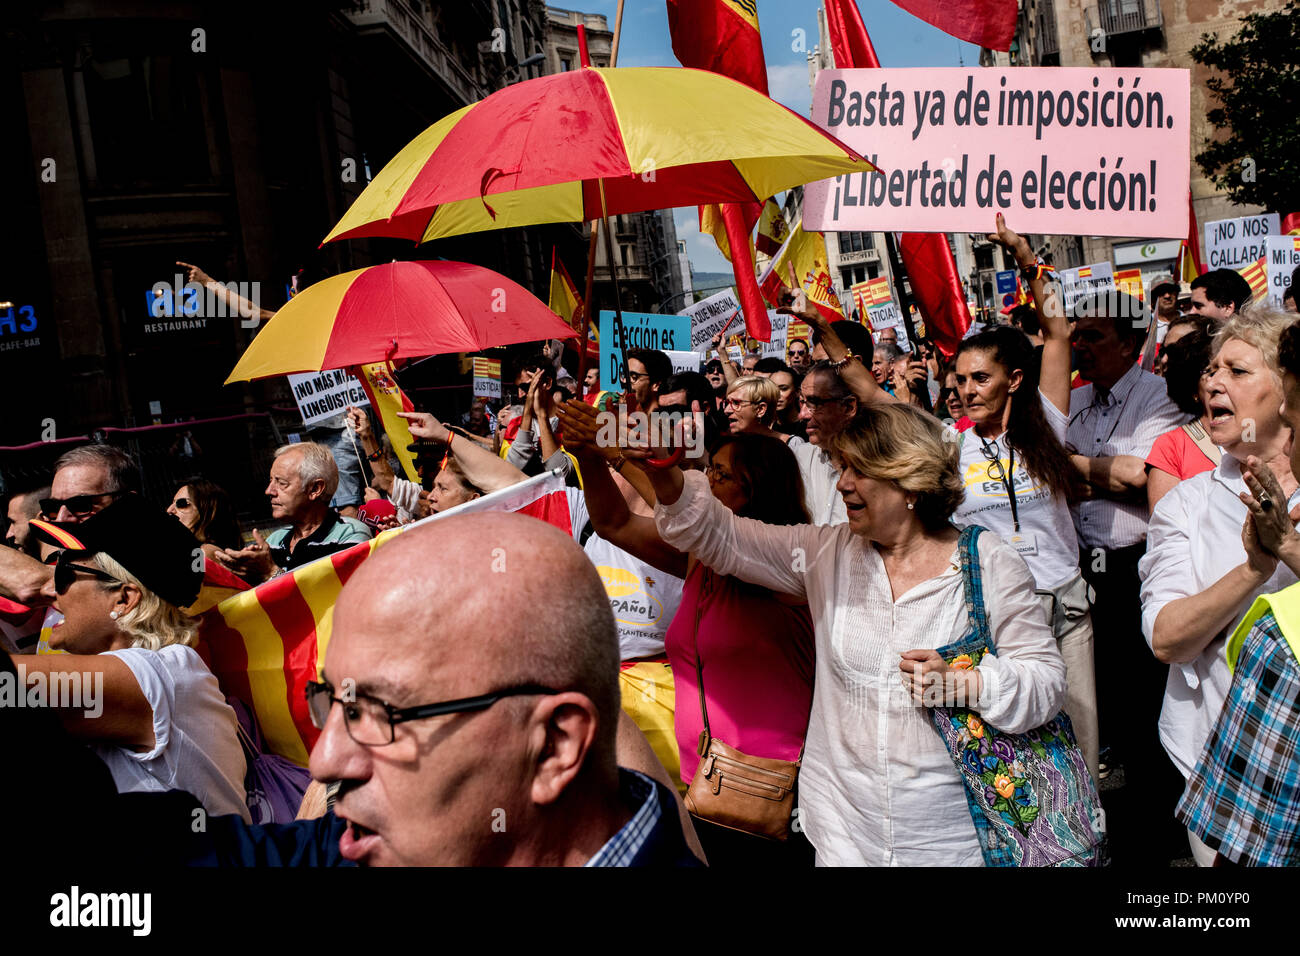 Barcelona, Spain. 16 September 2018.   Protesters called by unionist organizations hold Spanish  flags and colorful umbrellas in Barcelona. Demonstrators marched in support of the use of the Spanish language and against the Language immersion system, a technique using bilingual language education (Catalan and Spanish) in the Catalan schools. Credit:  Jordi Boixareu/Alamy Live News Stock Photo